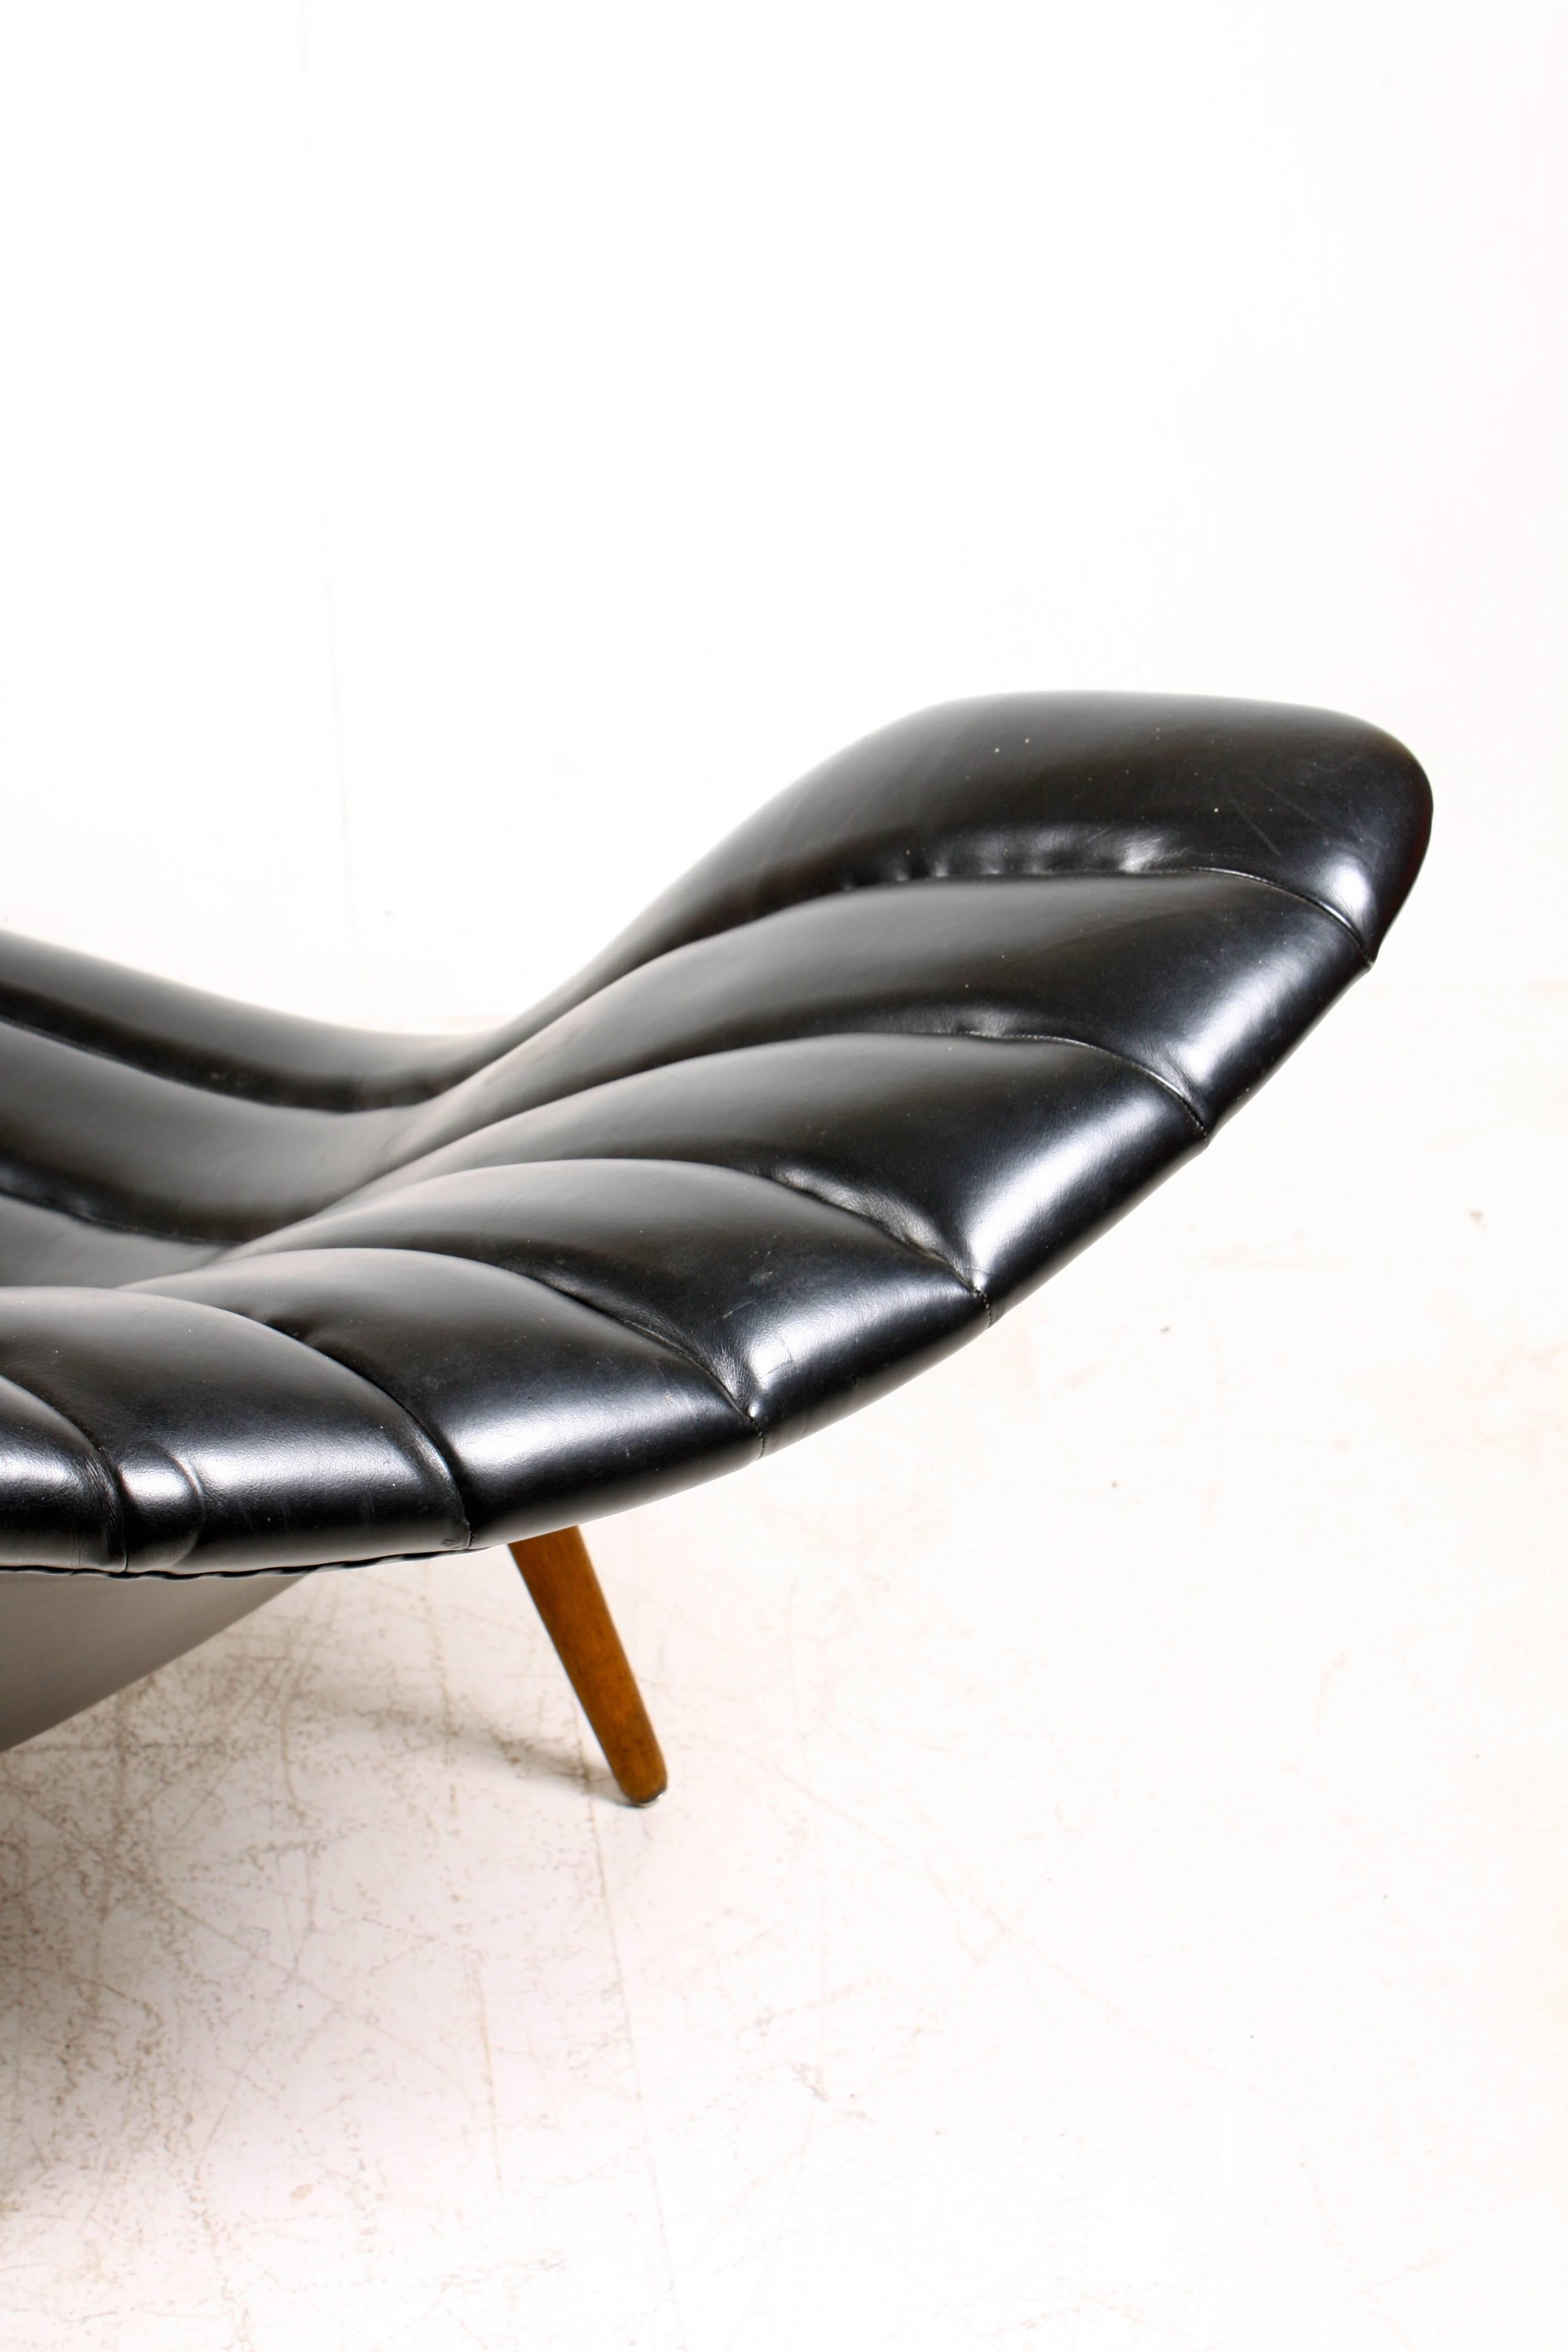 Great looking chaise designed by Hans Hartel for Deutsche Werkstätte in the 1950s. Upholstered in faux leather standing on patinated oak legs. Made in Germany in the 1950s. Nice original condition.